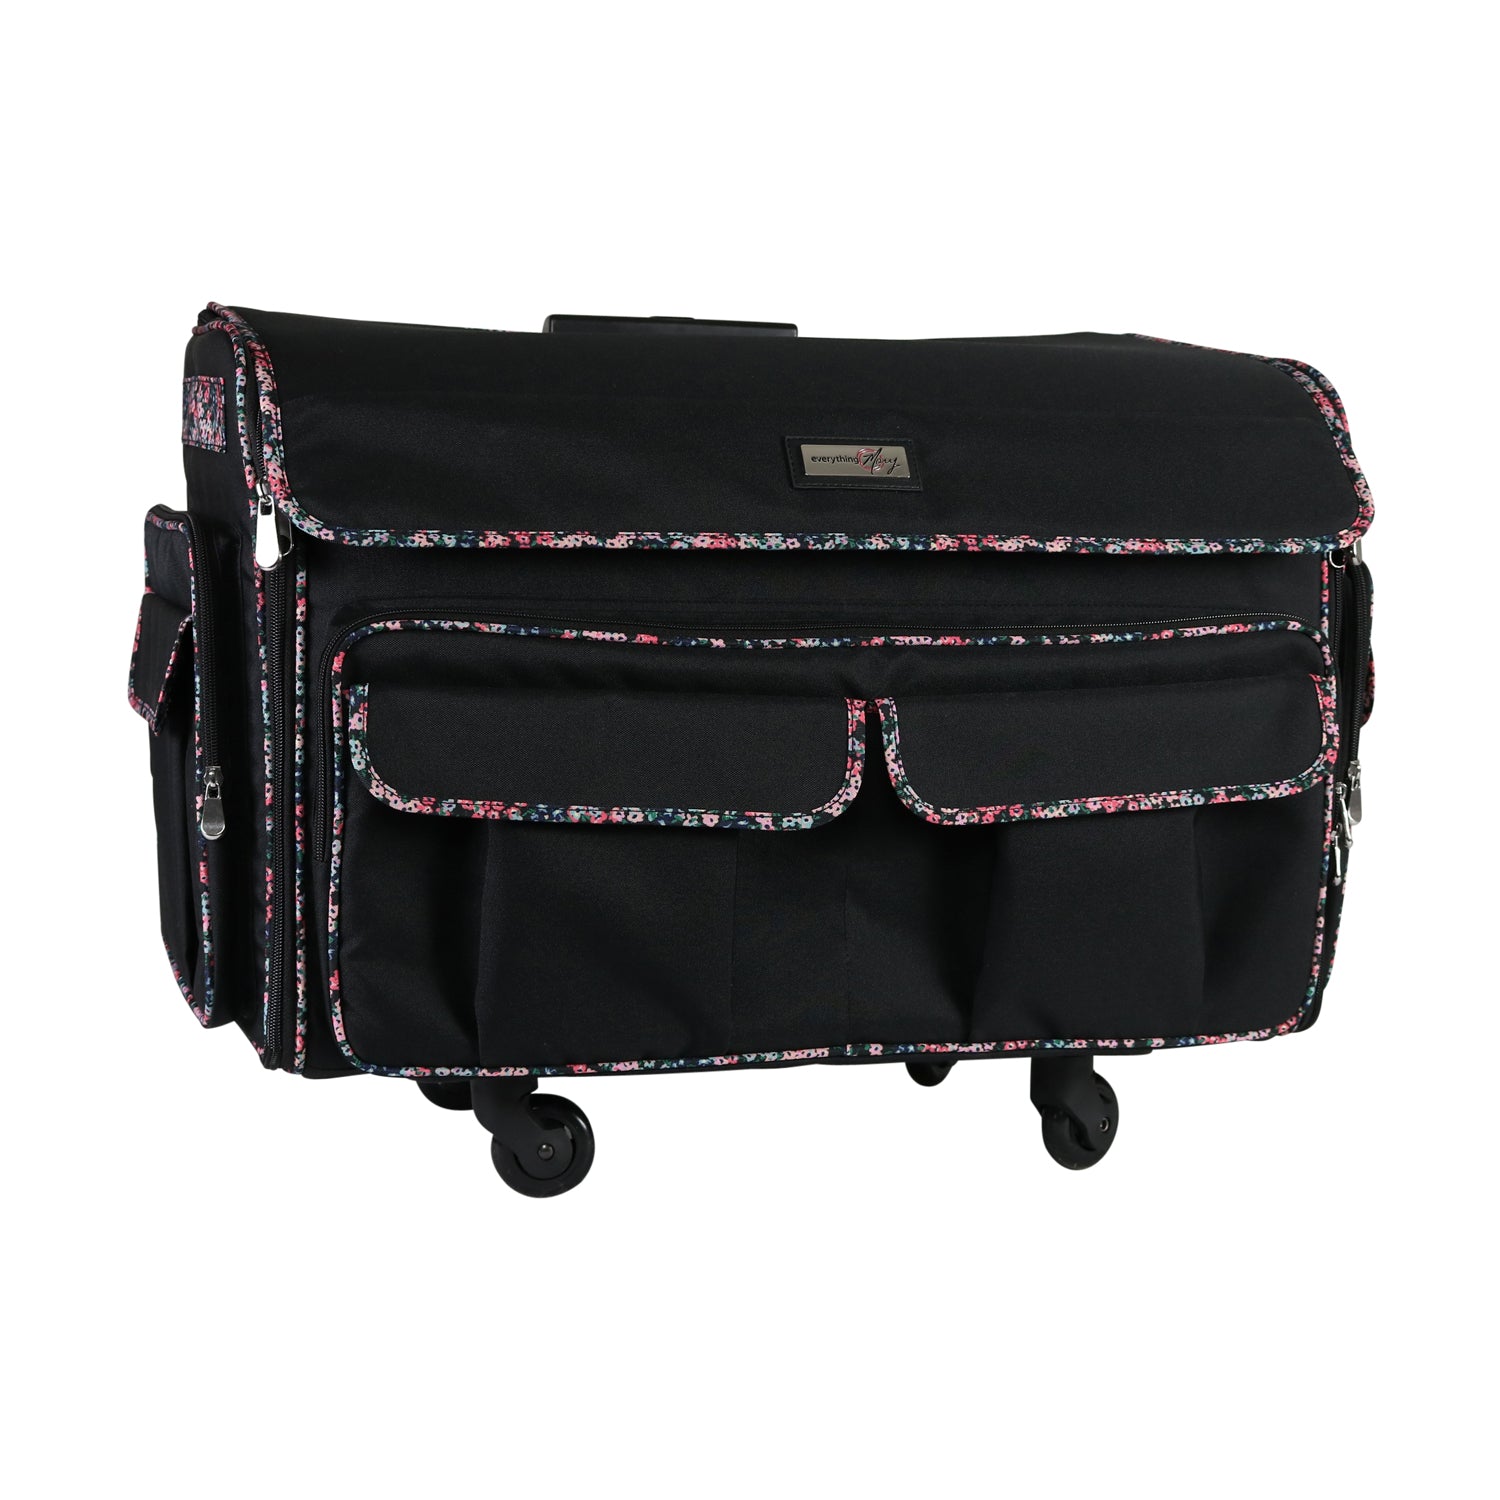 Everything Mary XXL Rolling Sewing Tote, Black & Floral - Rolling Carrying  Storage Cover Case Compatible with Large Brother and Singer Machines 